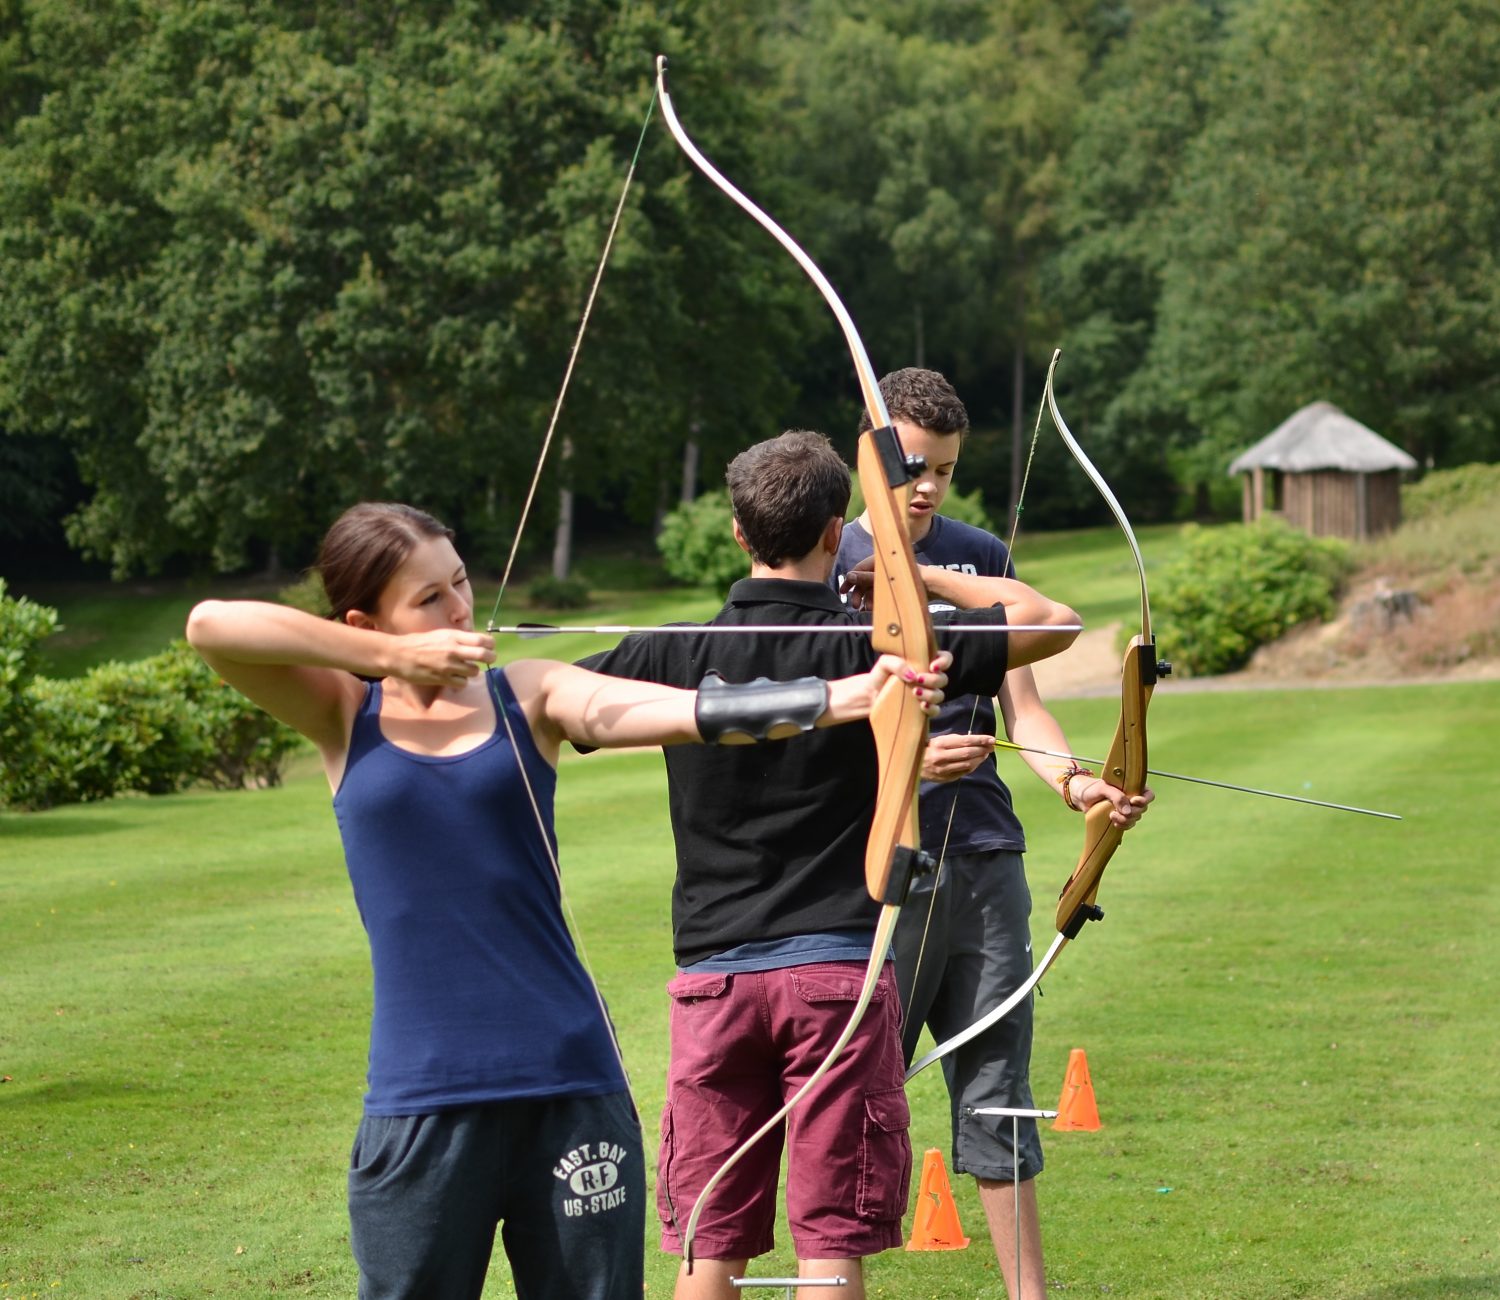 Targeting Archery In Outdoor Education WiseUp Team Building.